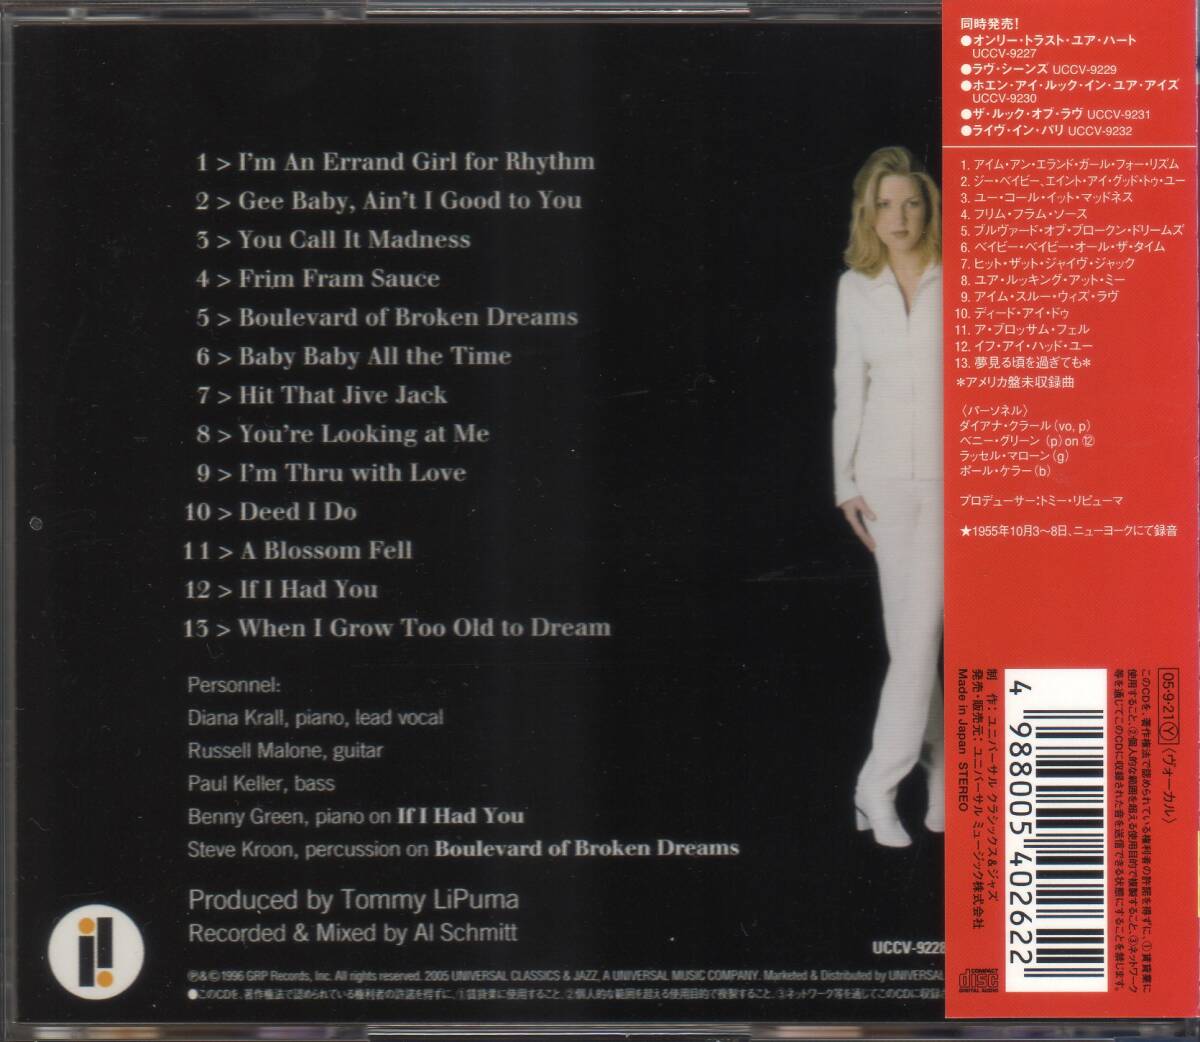 【CD】 ダイアナ・クラール DIANA KRALL  /  All For You  (A Dedication To The Nat King Cole Trio)の画像2